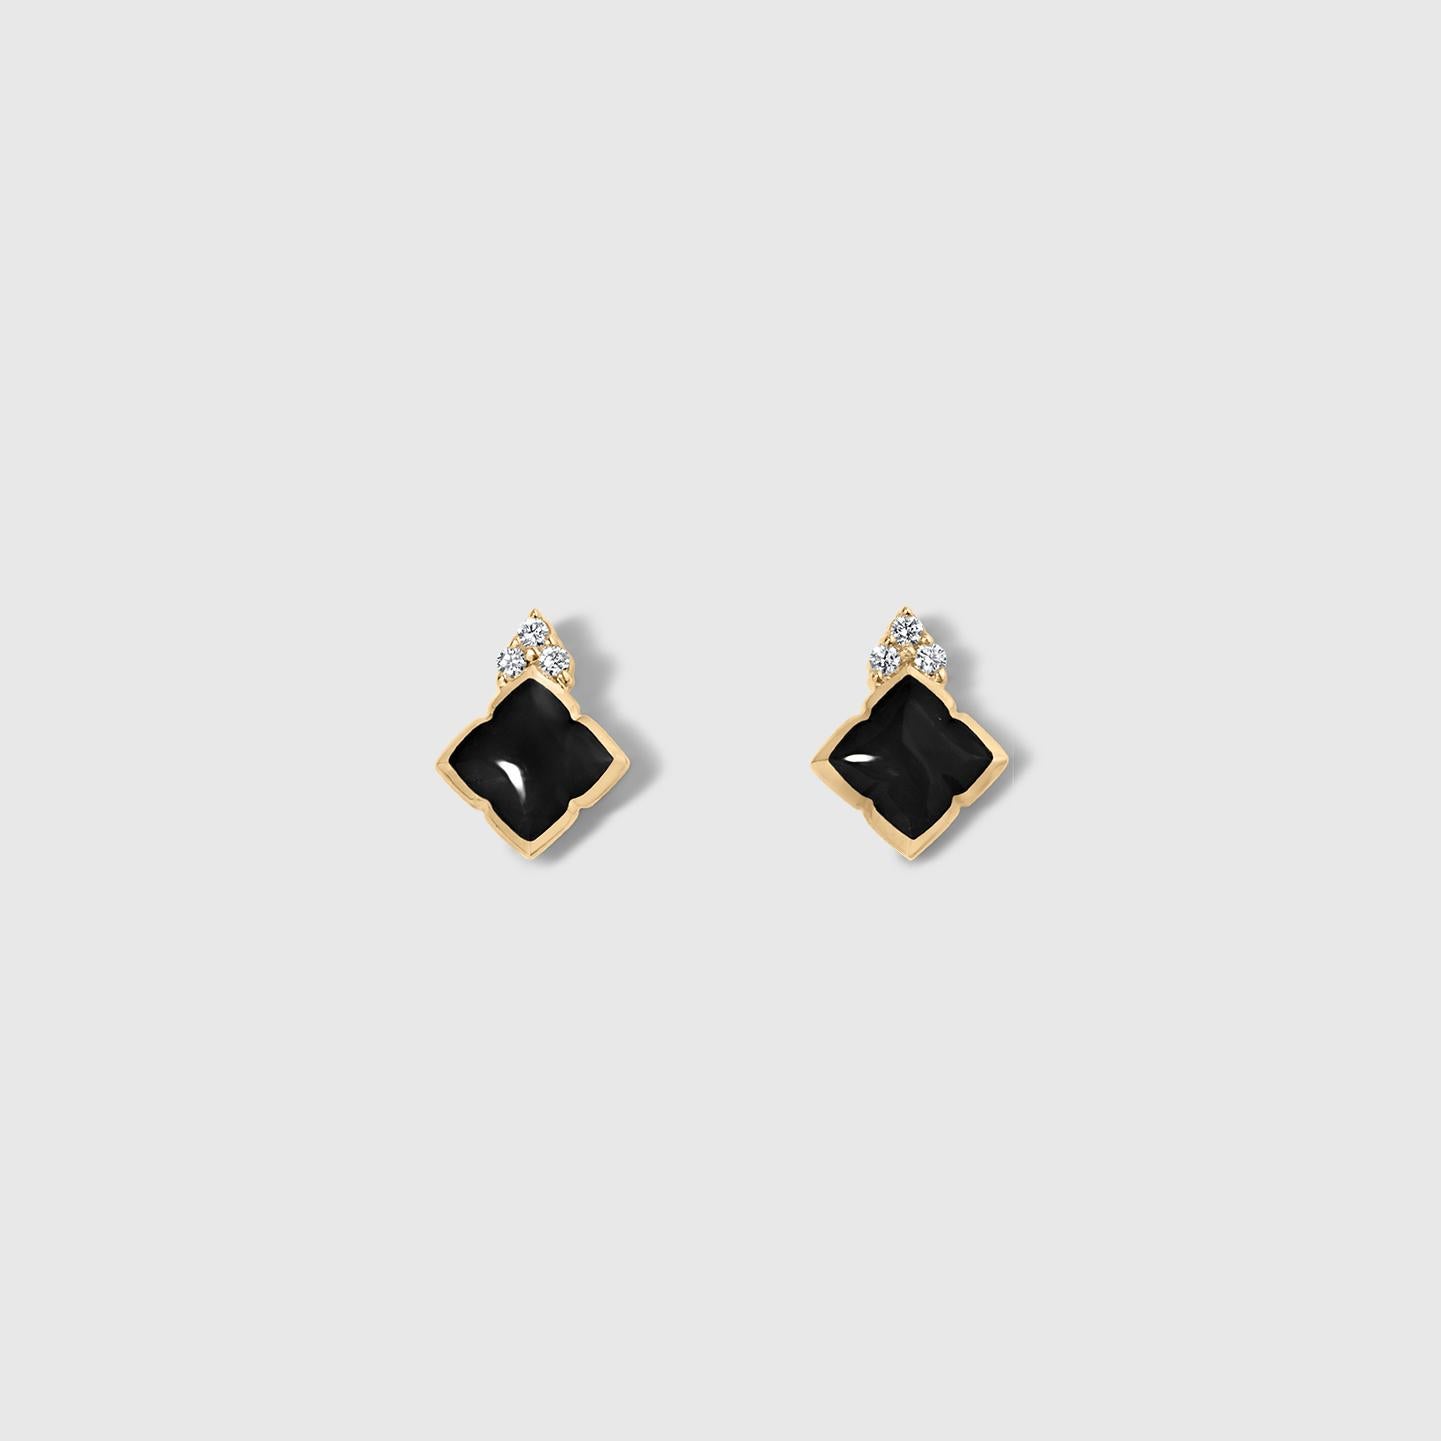 Black Onyx Post Earrings with Diamond Detail, 14kt Yellow Gold

All designs may be custom-ordered in many of Kabana’s stones, including: sleeping beauty turquoise, turquoise, four-star opal, five-star-high-grade opal, black onyx, red or orange spiny